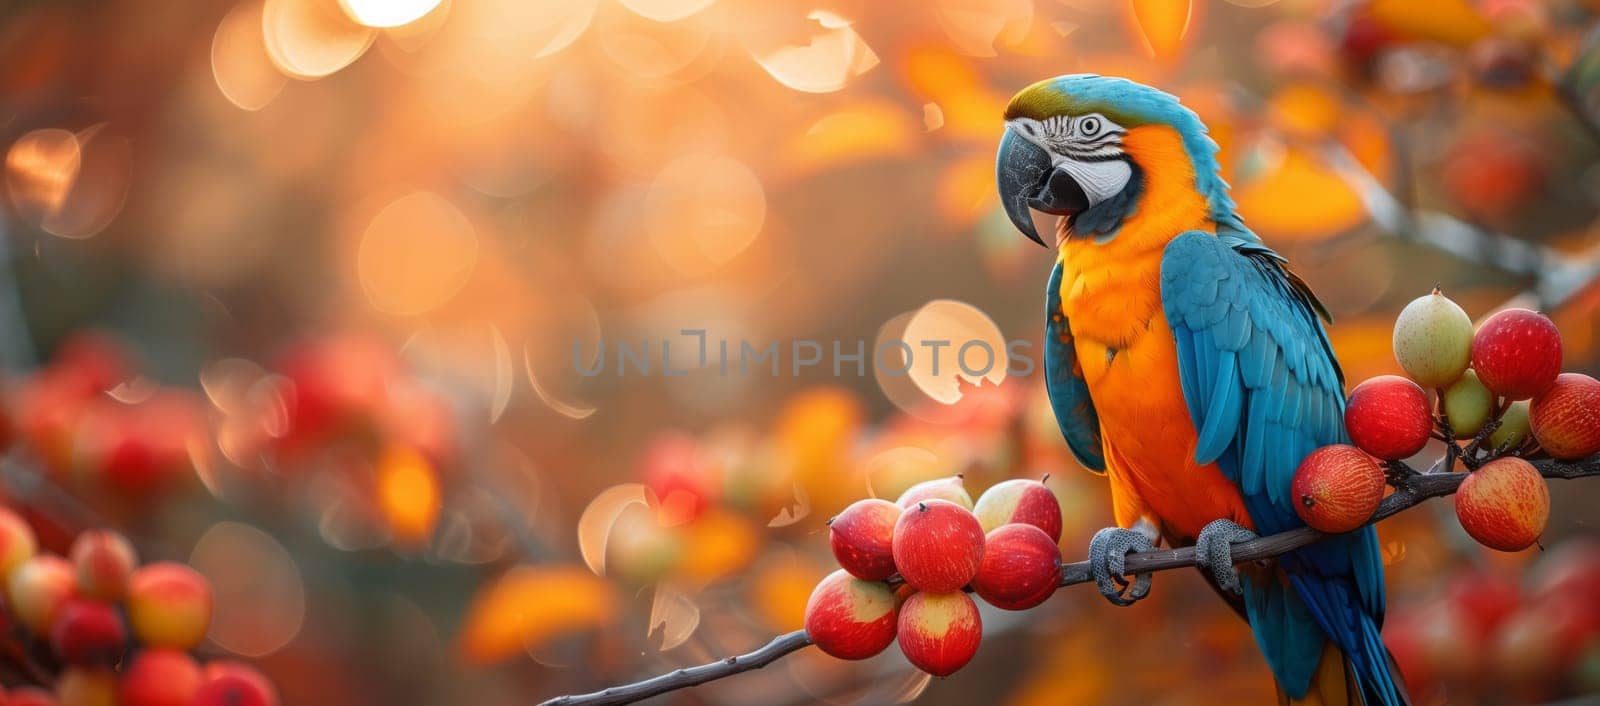 An orange parrot, possibly a Macaw or Parakeet, is perched on a branch of a tree with colorful petals. Its beak and feathers are vibrant in a closeup shot